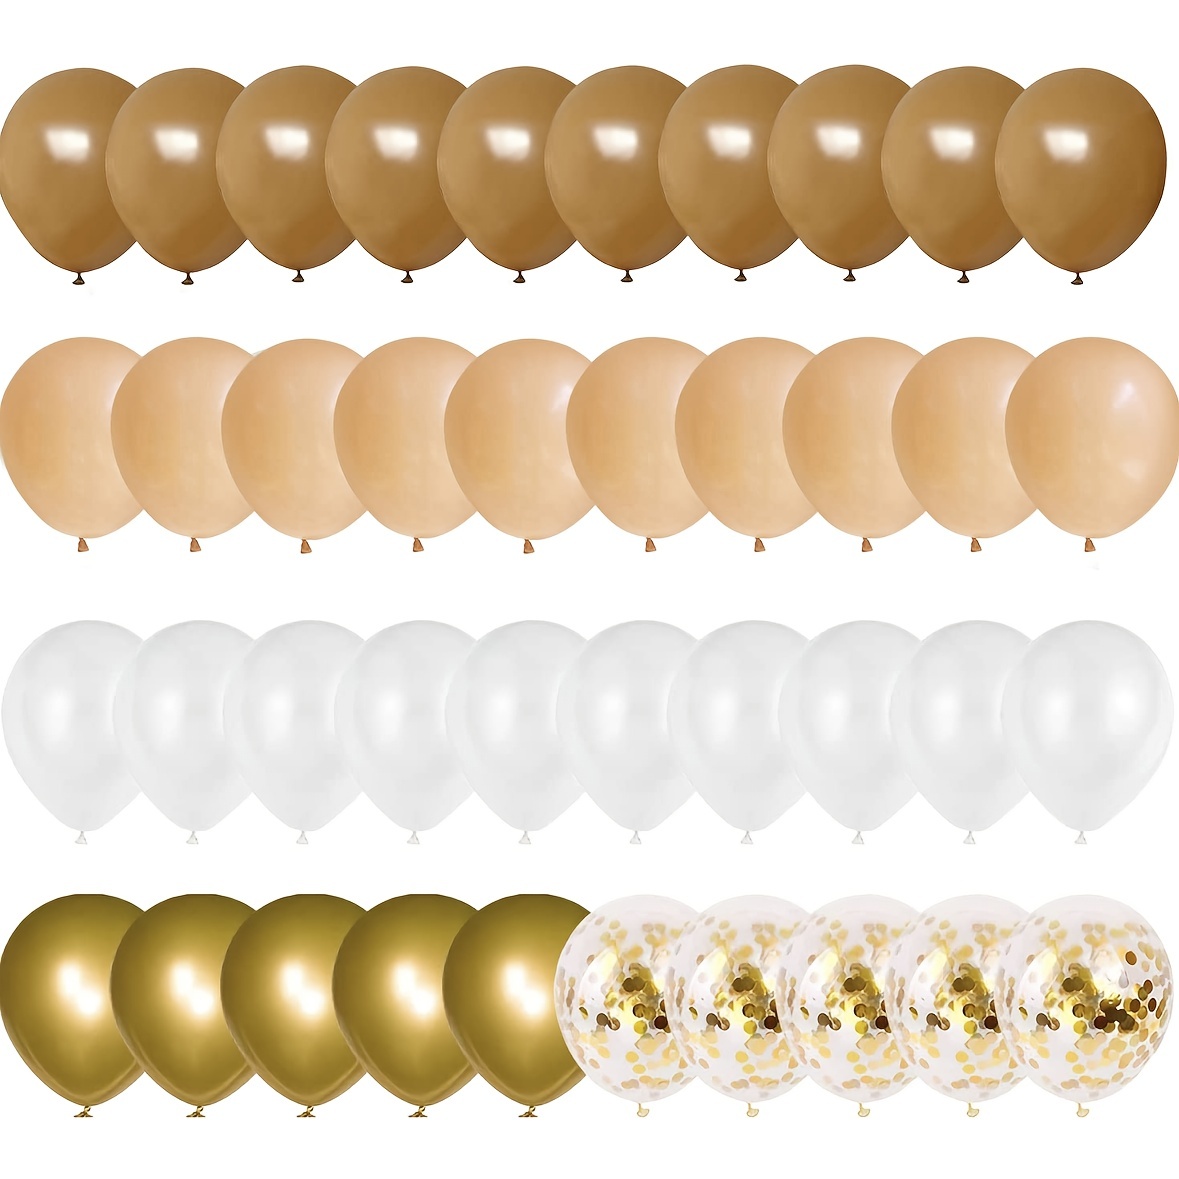 50pc Tan Brown Nude White & Golden Confetti Balloons for Birthday Party Decorations